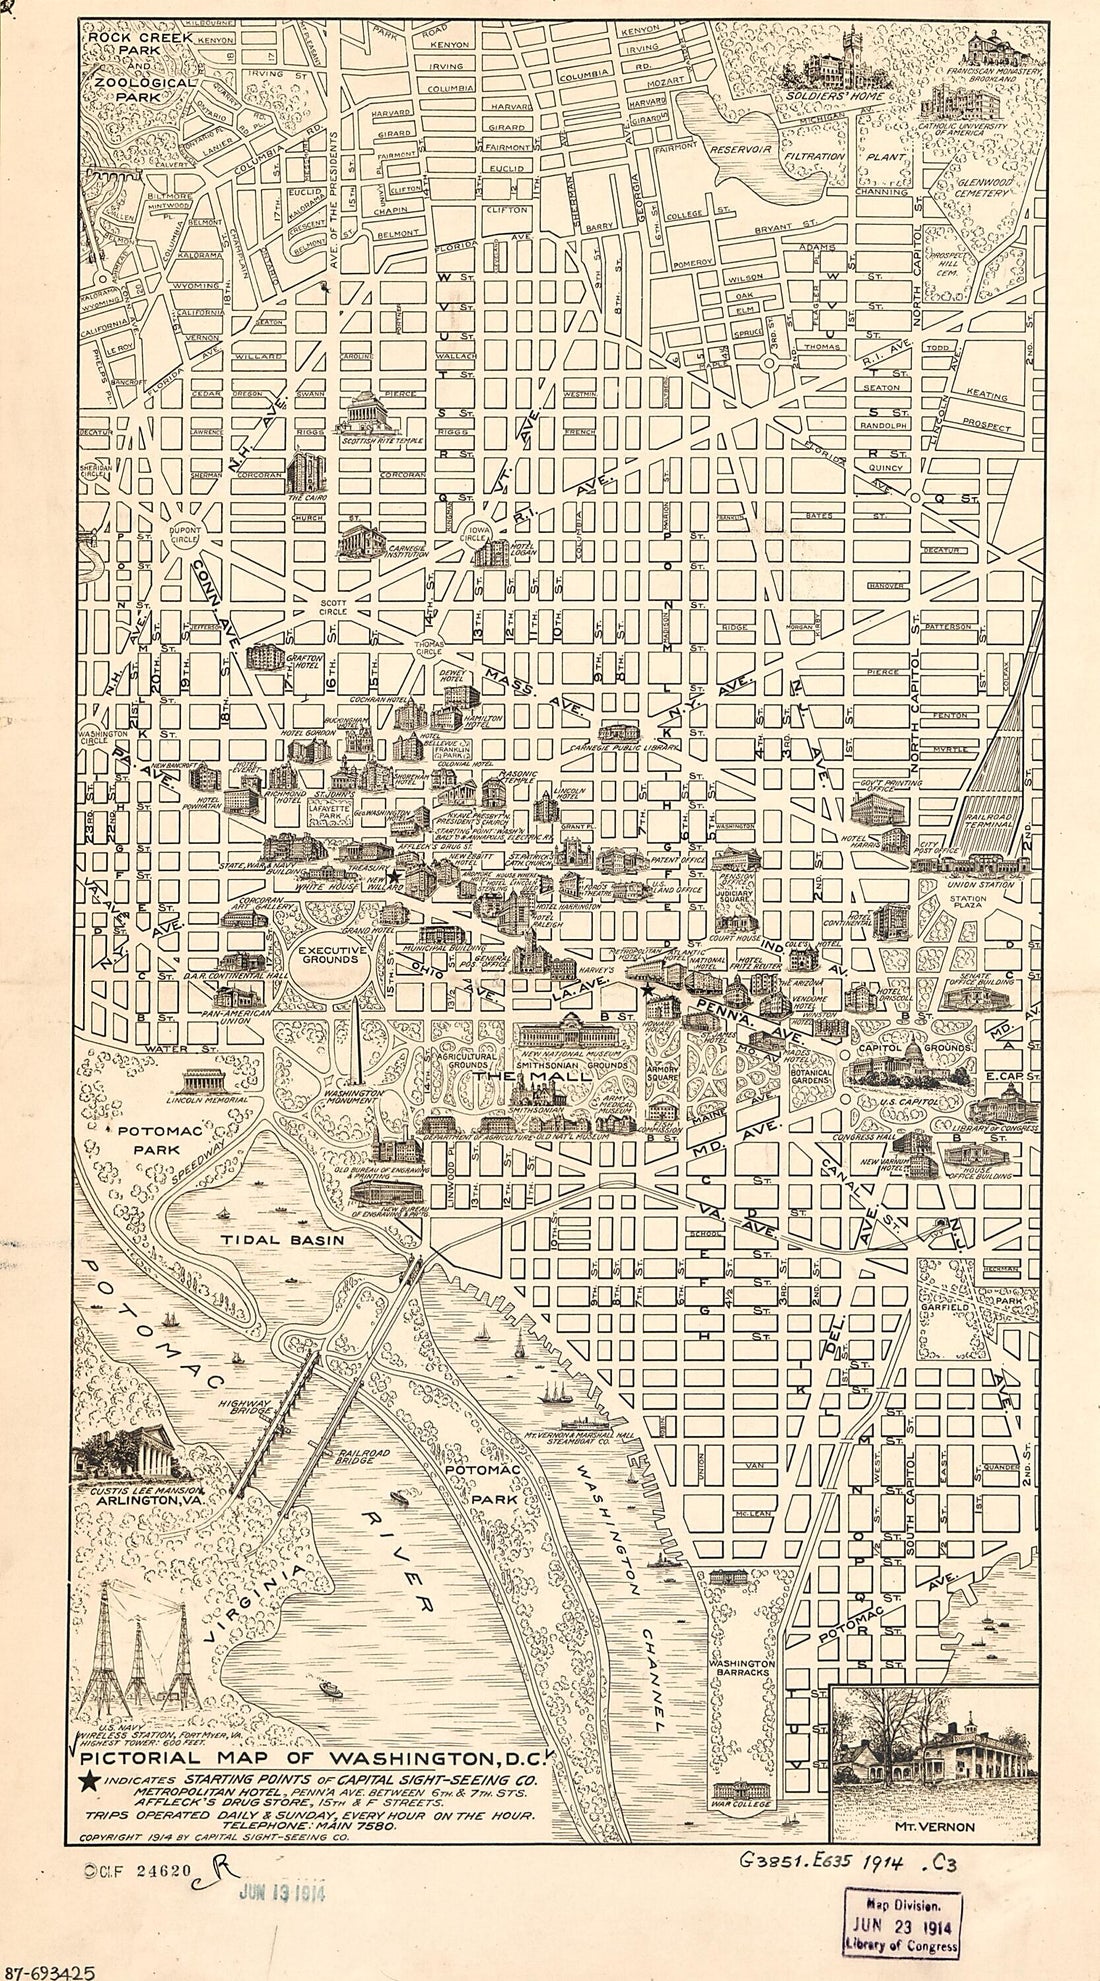 This old map of Pictorial Map of Washington, D.C from 1914 was created by  Seeing Co in 1914